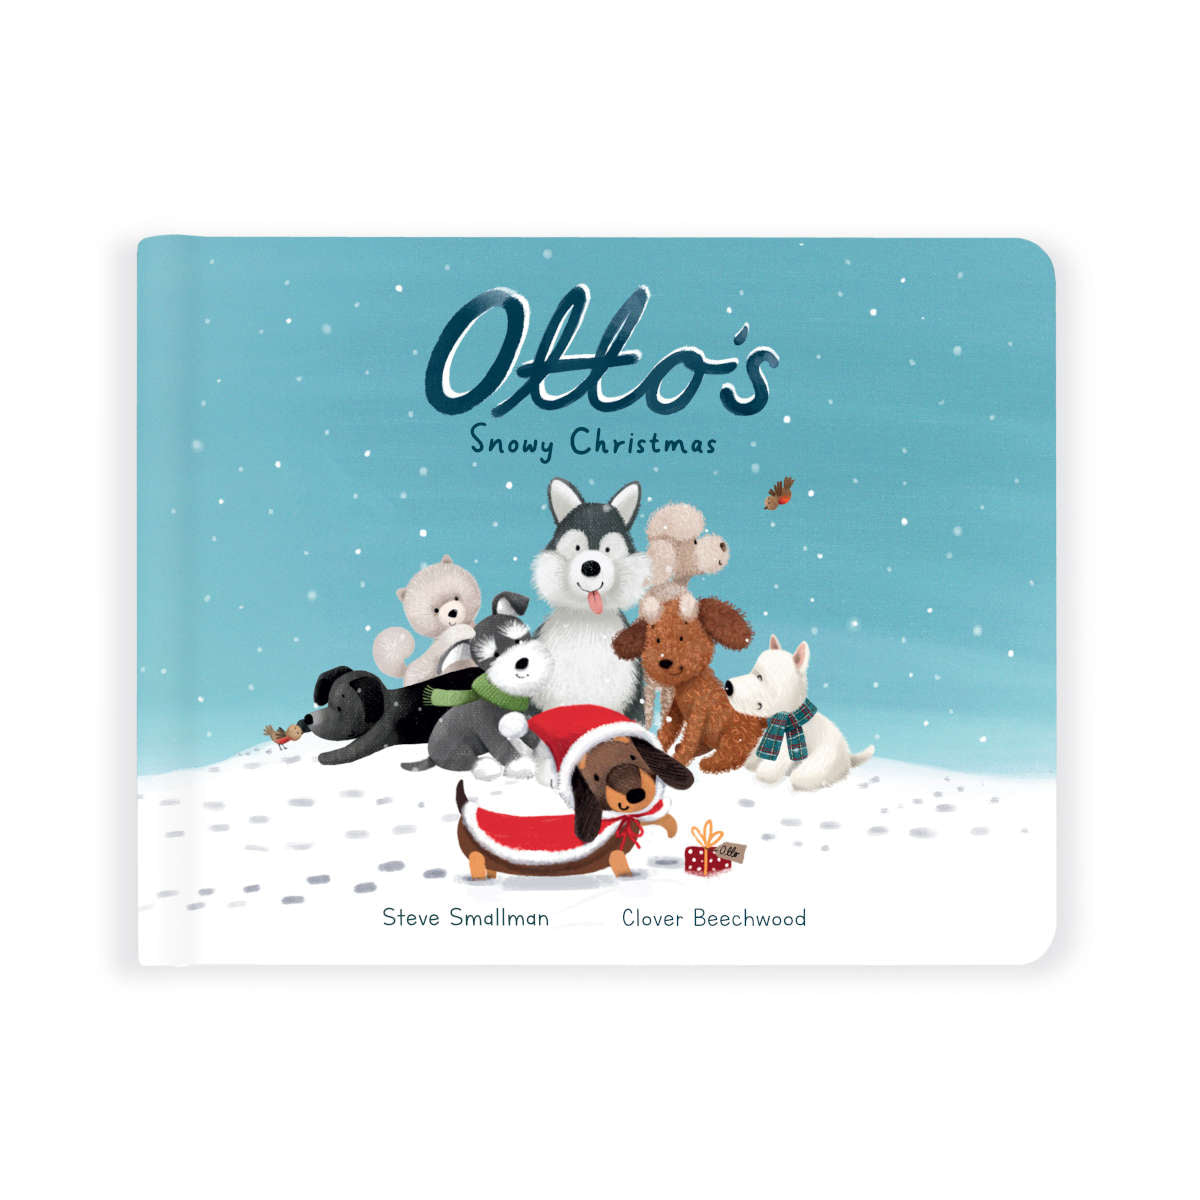 Jellycat "Otto's Snowy Christmas" Book